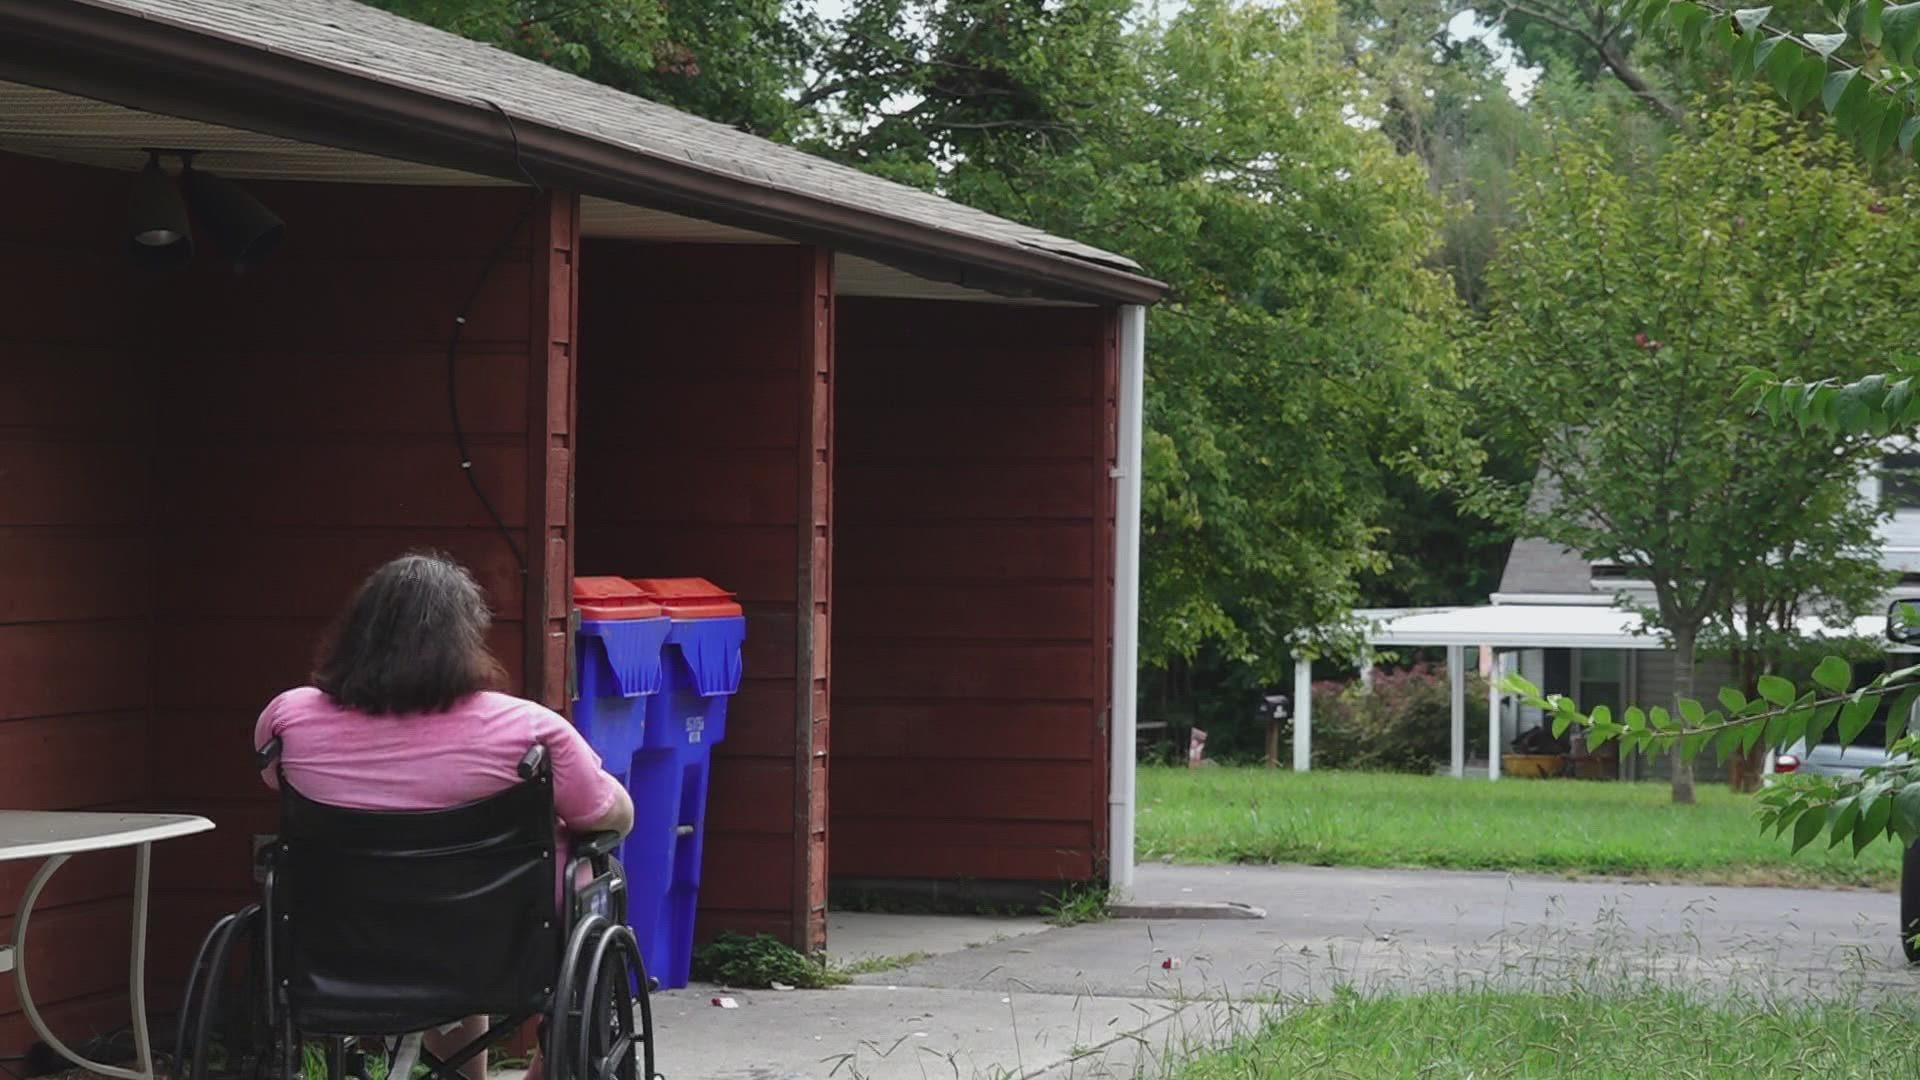 State records show it's one of 13 licensed boarding homes for adults with intellectual or developmental disabilities in the entire state.